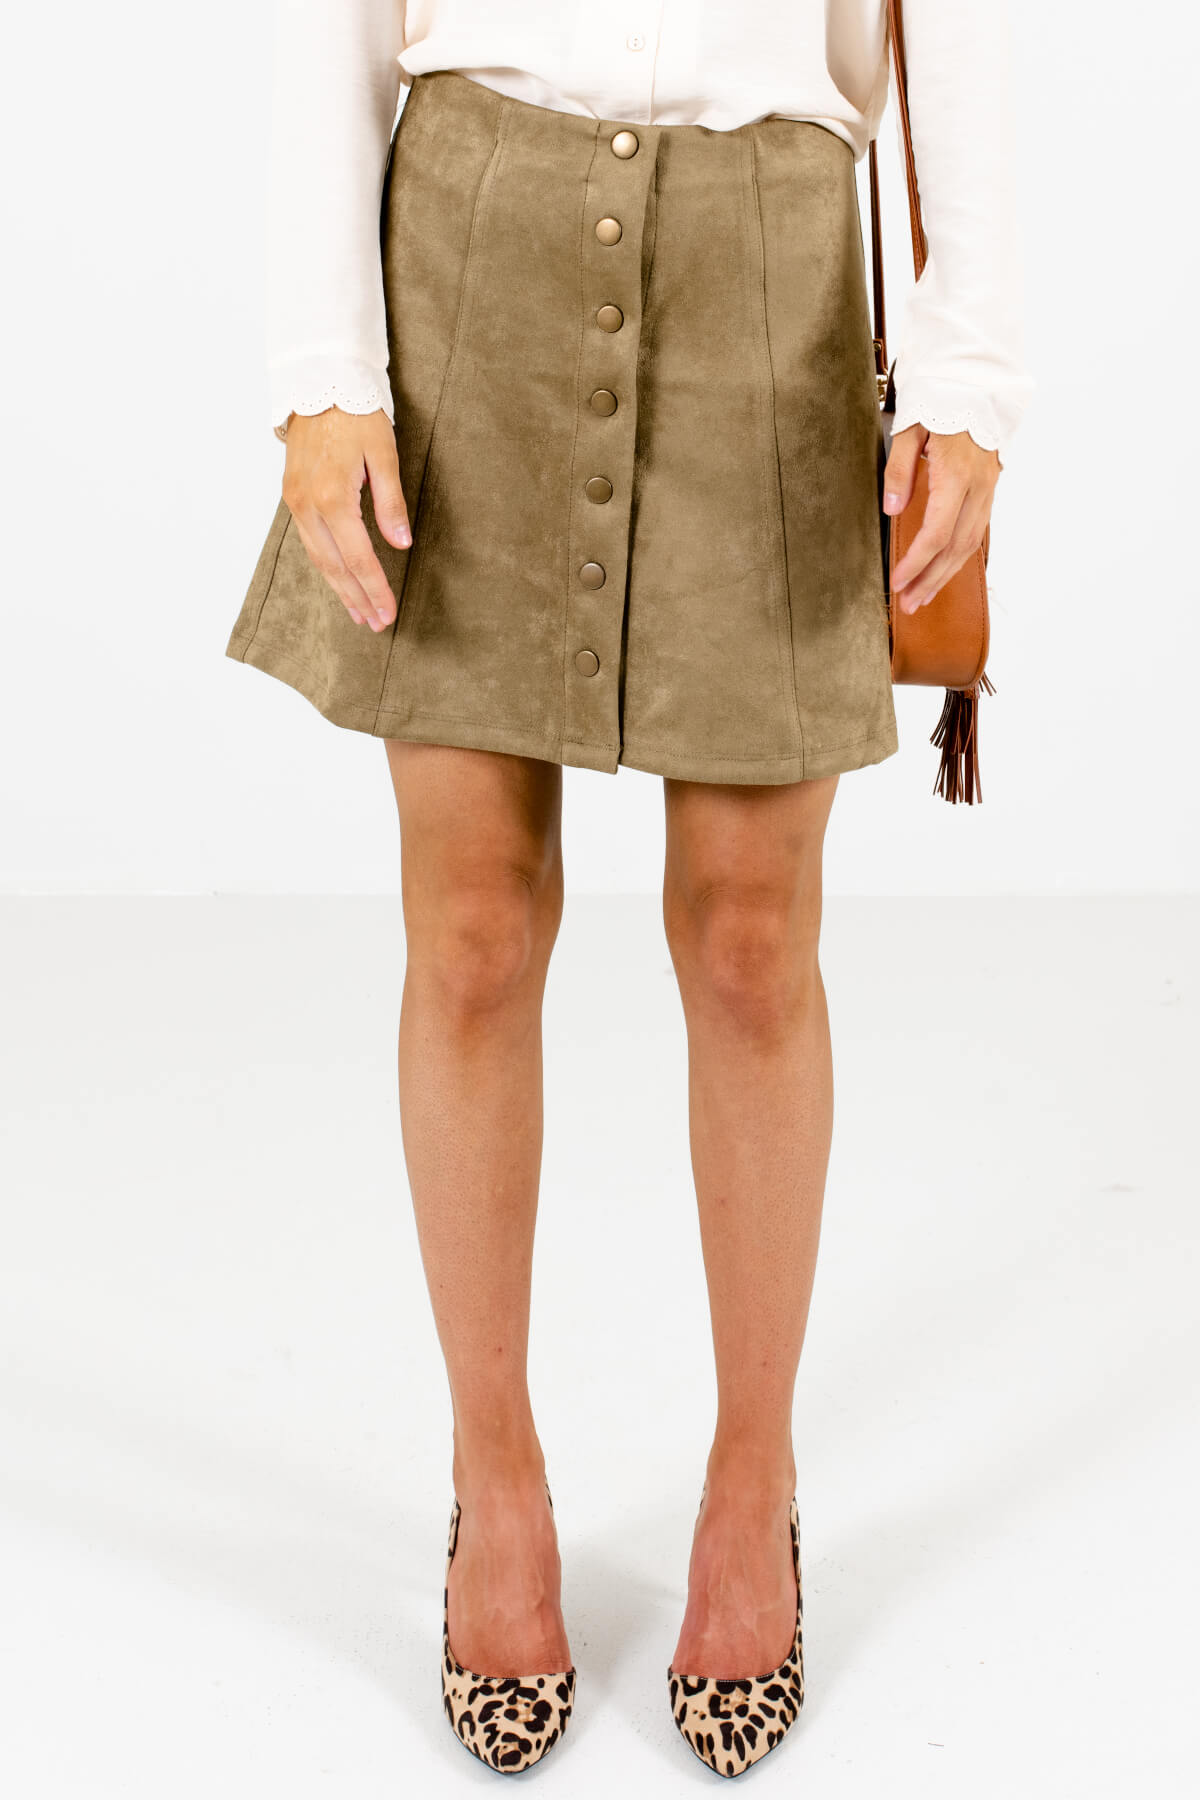 Olive Green High-Quality Suede Material Boutique Mini Skirts for Women